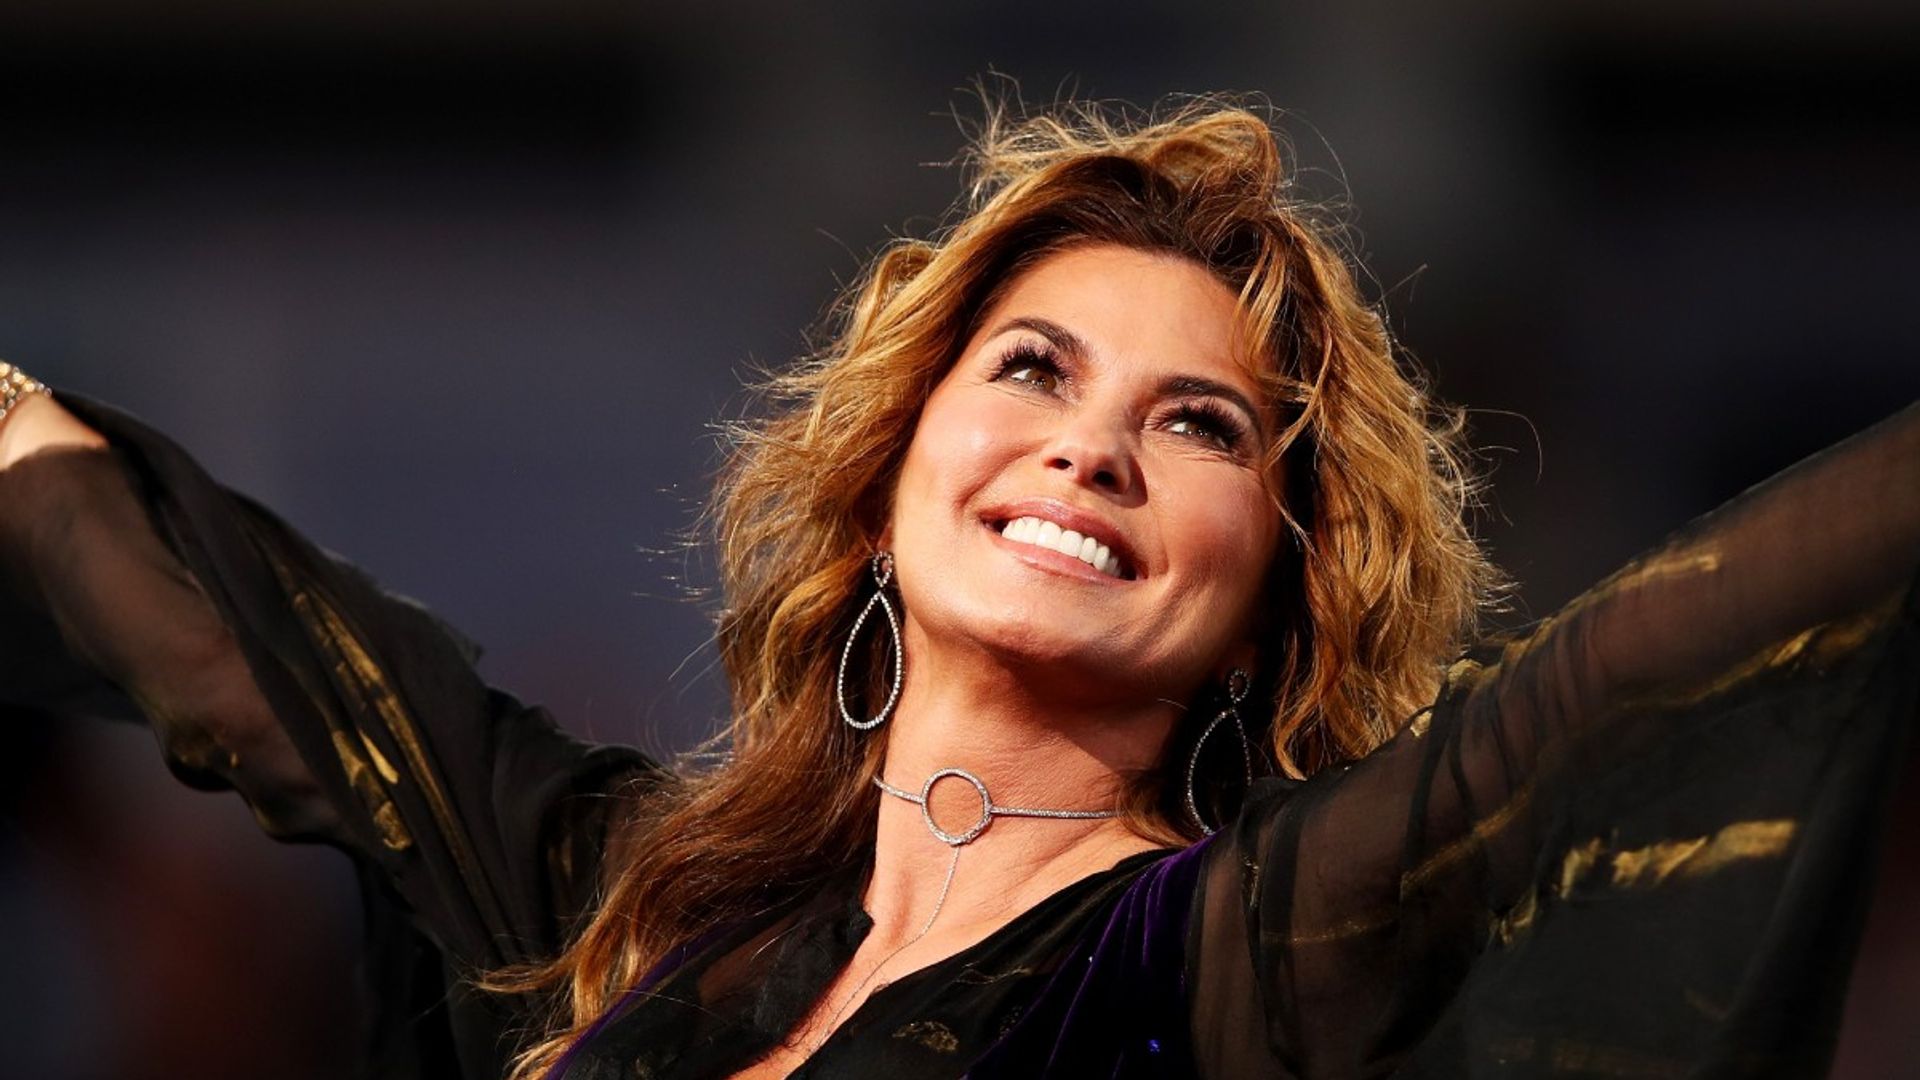 Shania Twain teases fans with incredibly exciting news